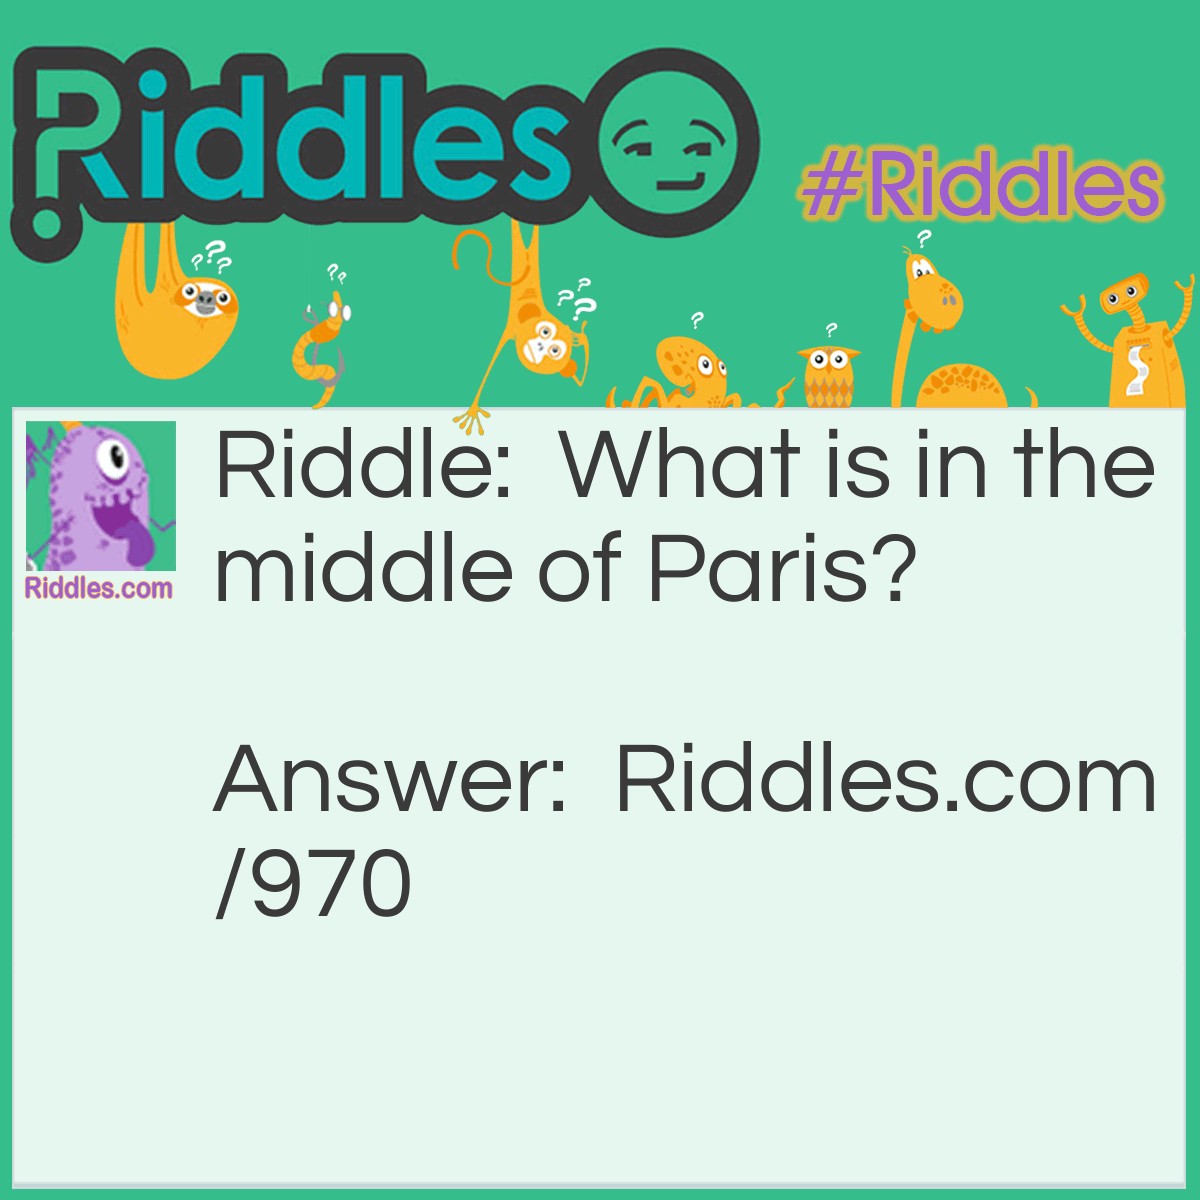 Riddle: What is in the middle of Paris? Answer: The letter R.